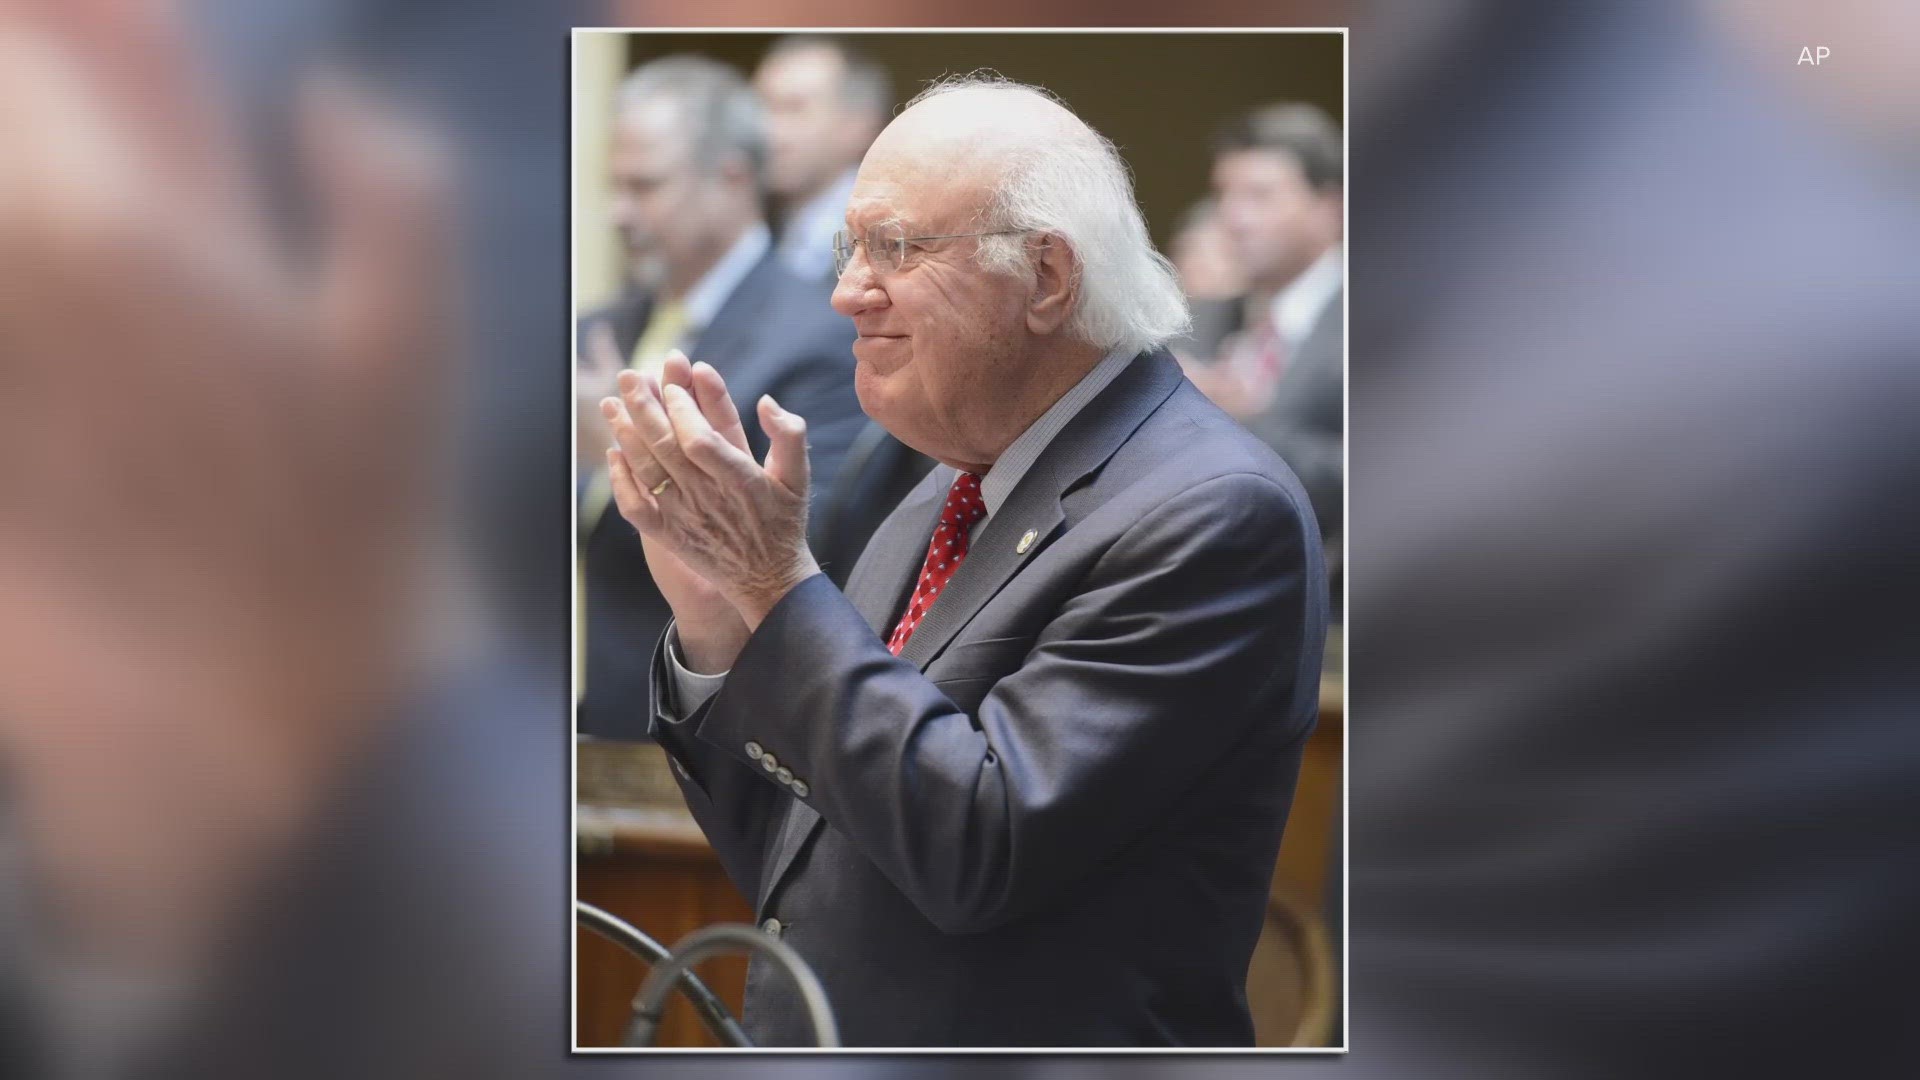 The 54th governor of Kentucky passed away Sunday and will lie in state at the Frankfort Capitol on Dec. 15 with memorial services to be held on Saturday.